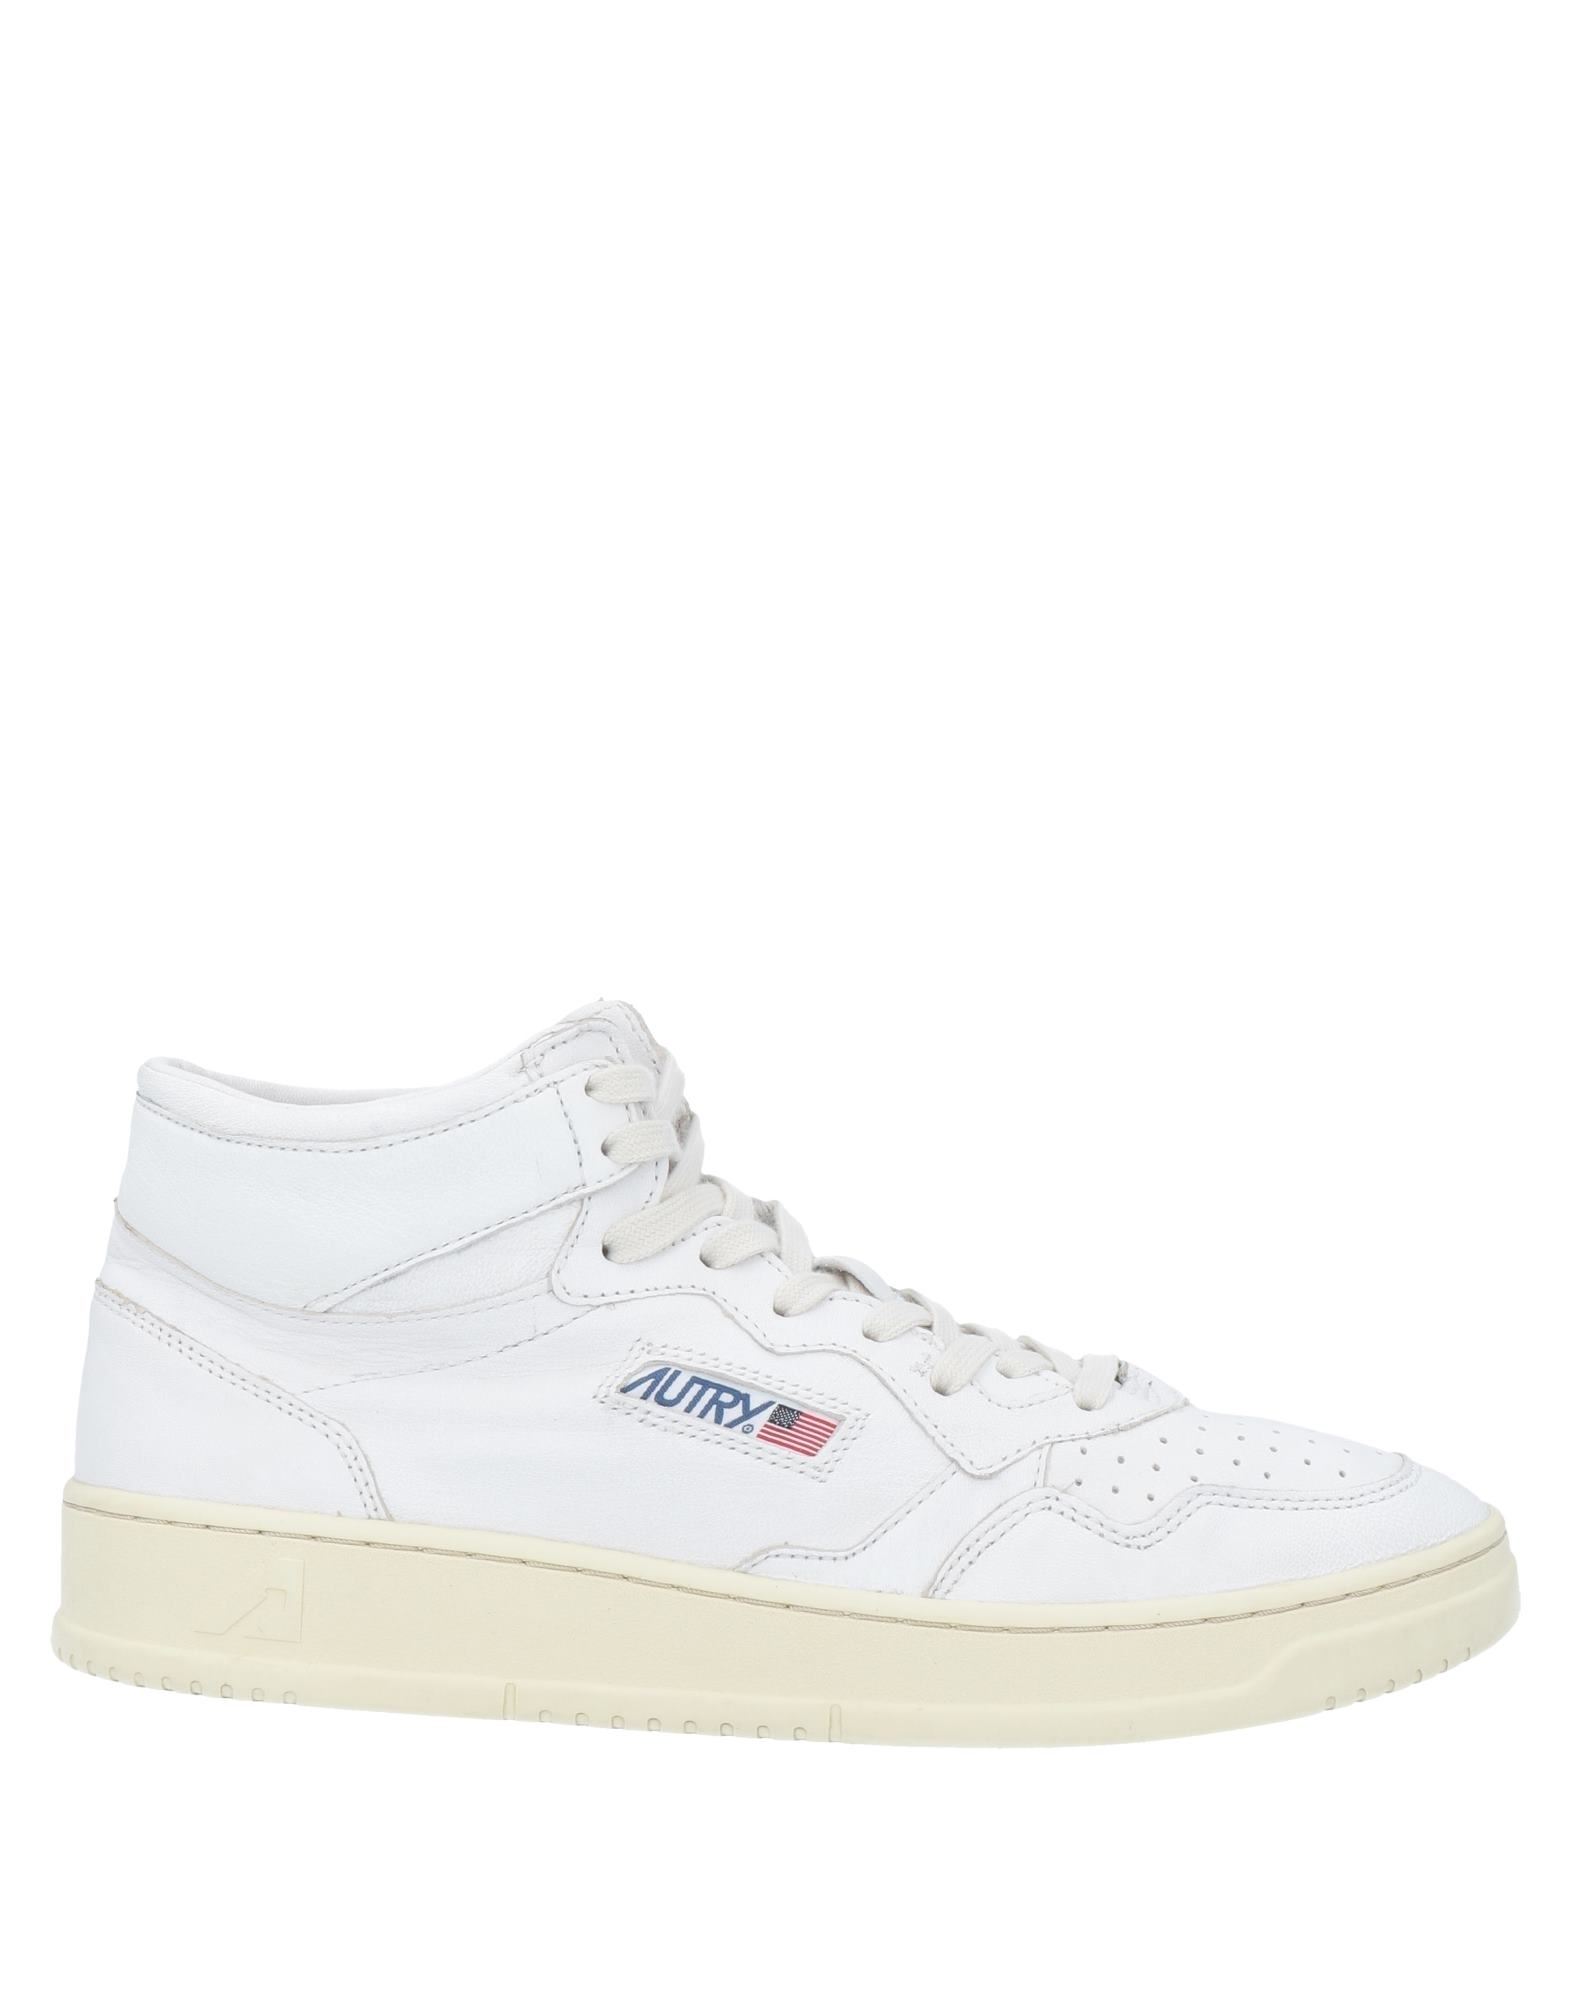 Shop Autry Woman Sneakers White Size 6 Goat Skin